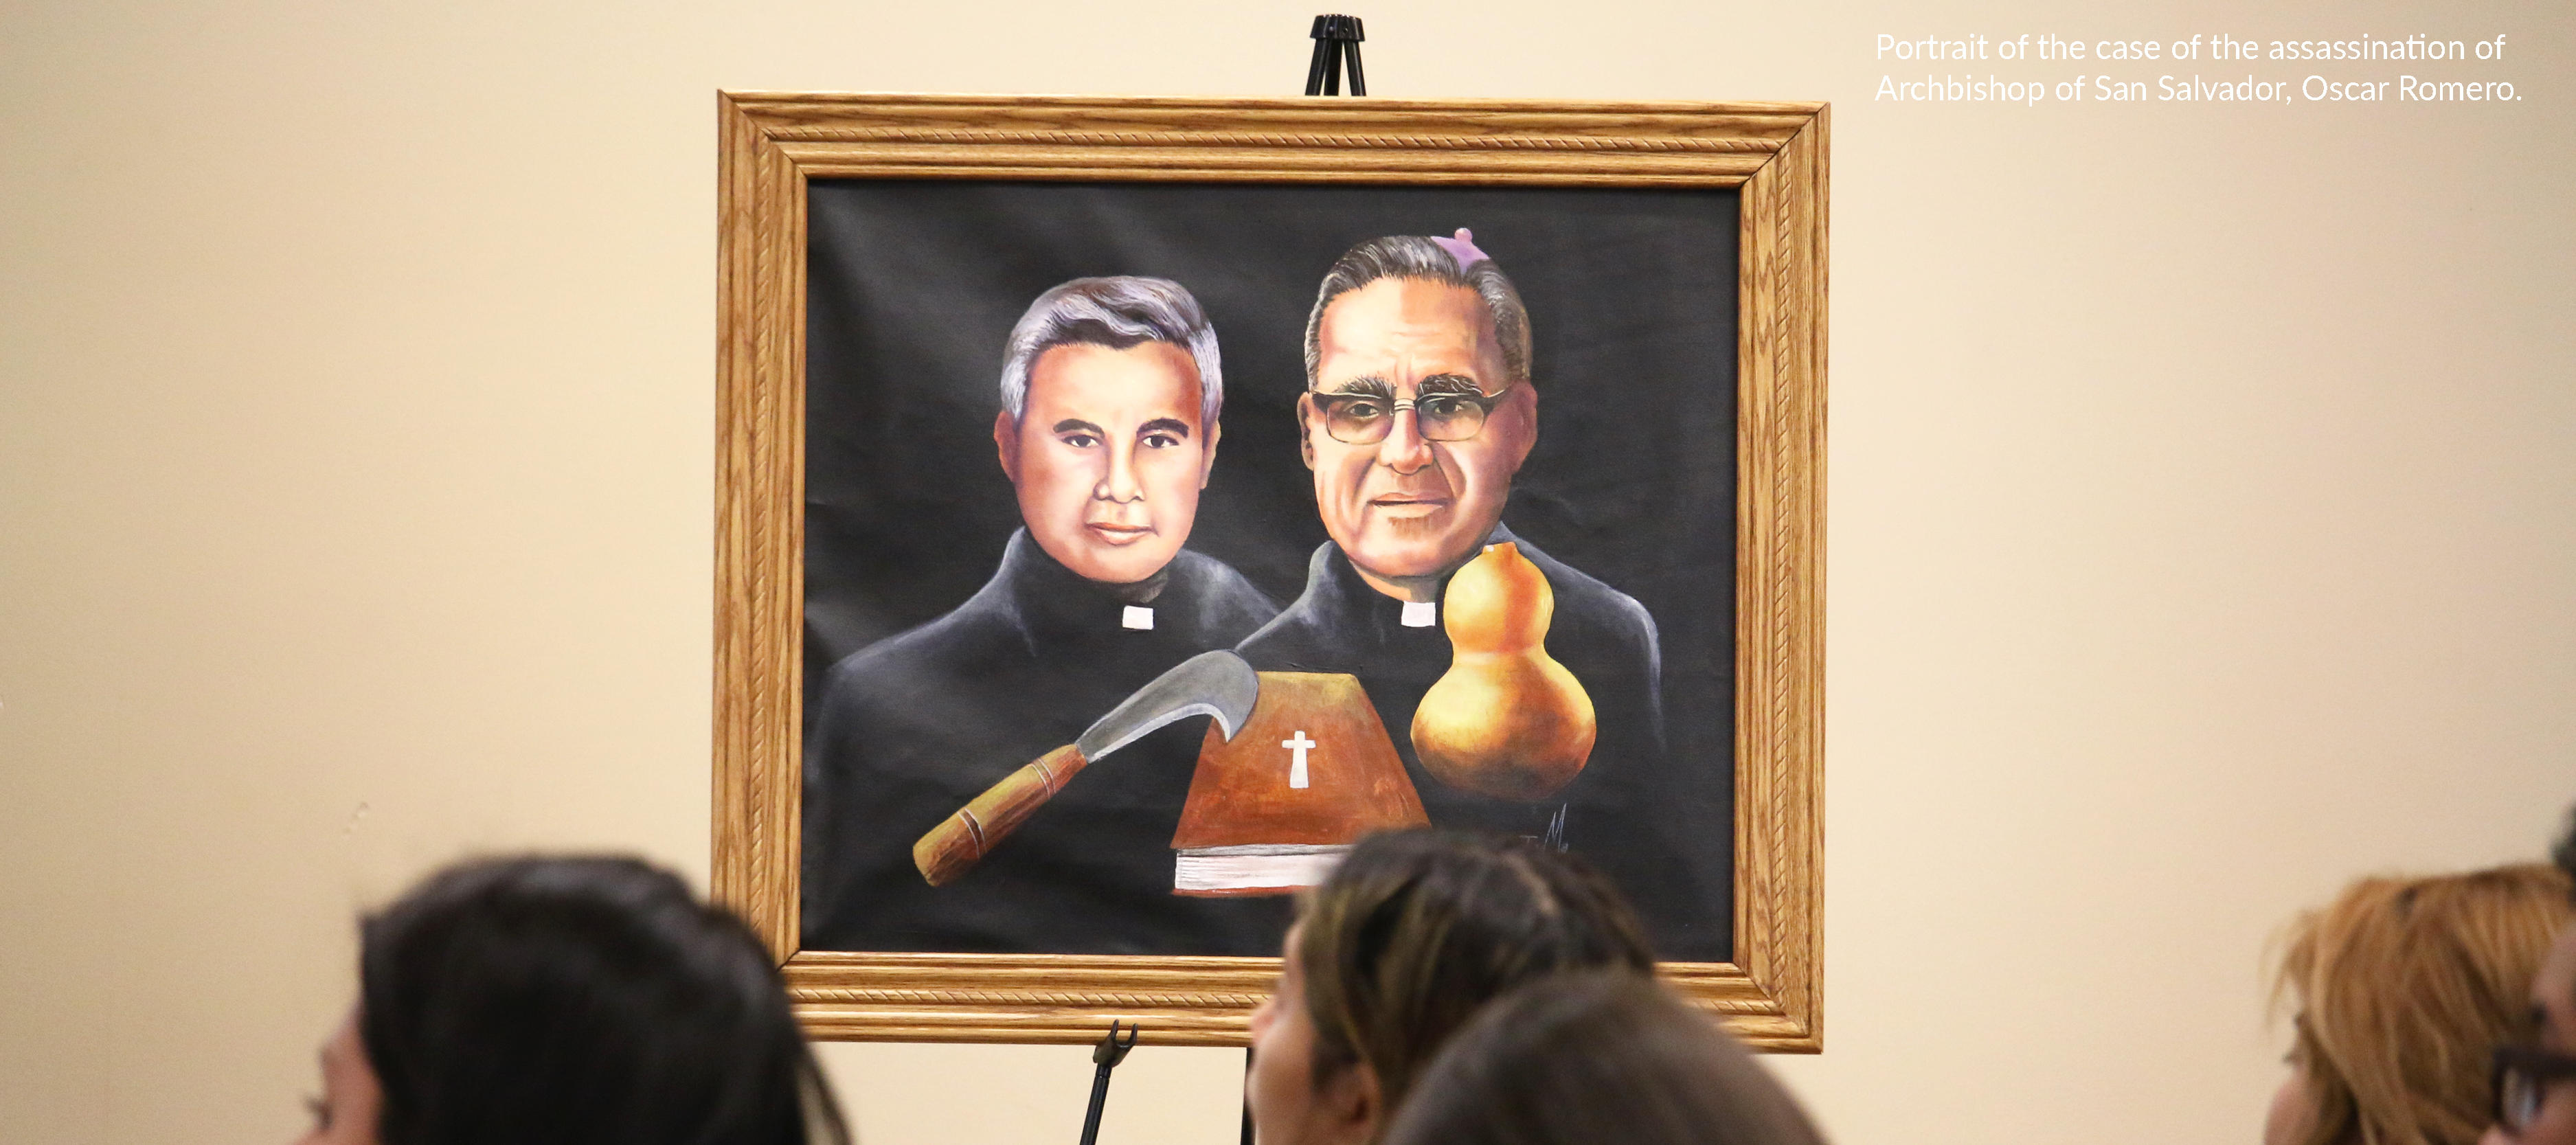 Portrait of the case of the assassination of Archbishop of San Salvador, Oscar Romero. 